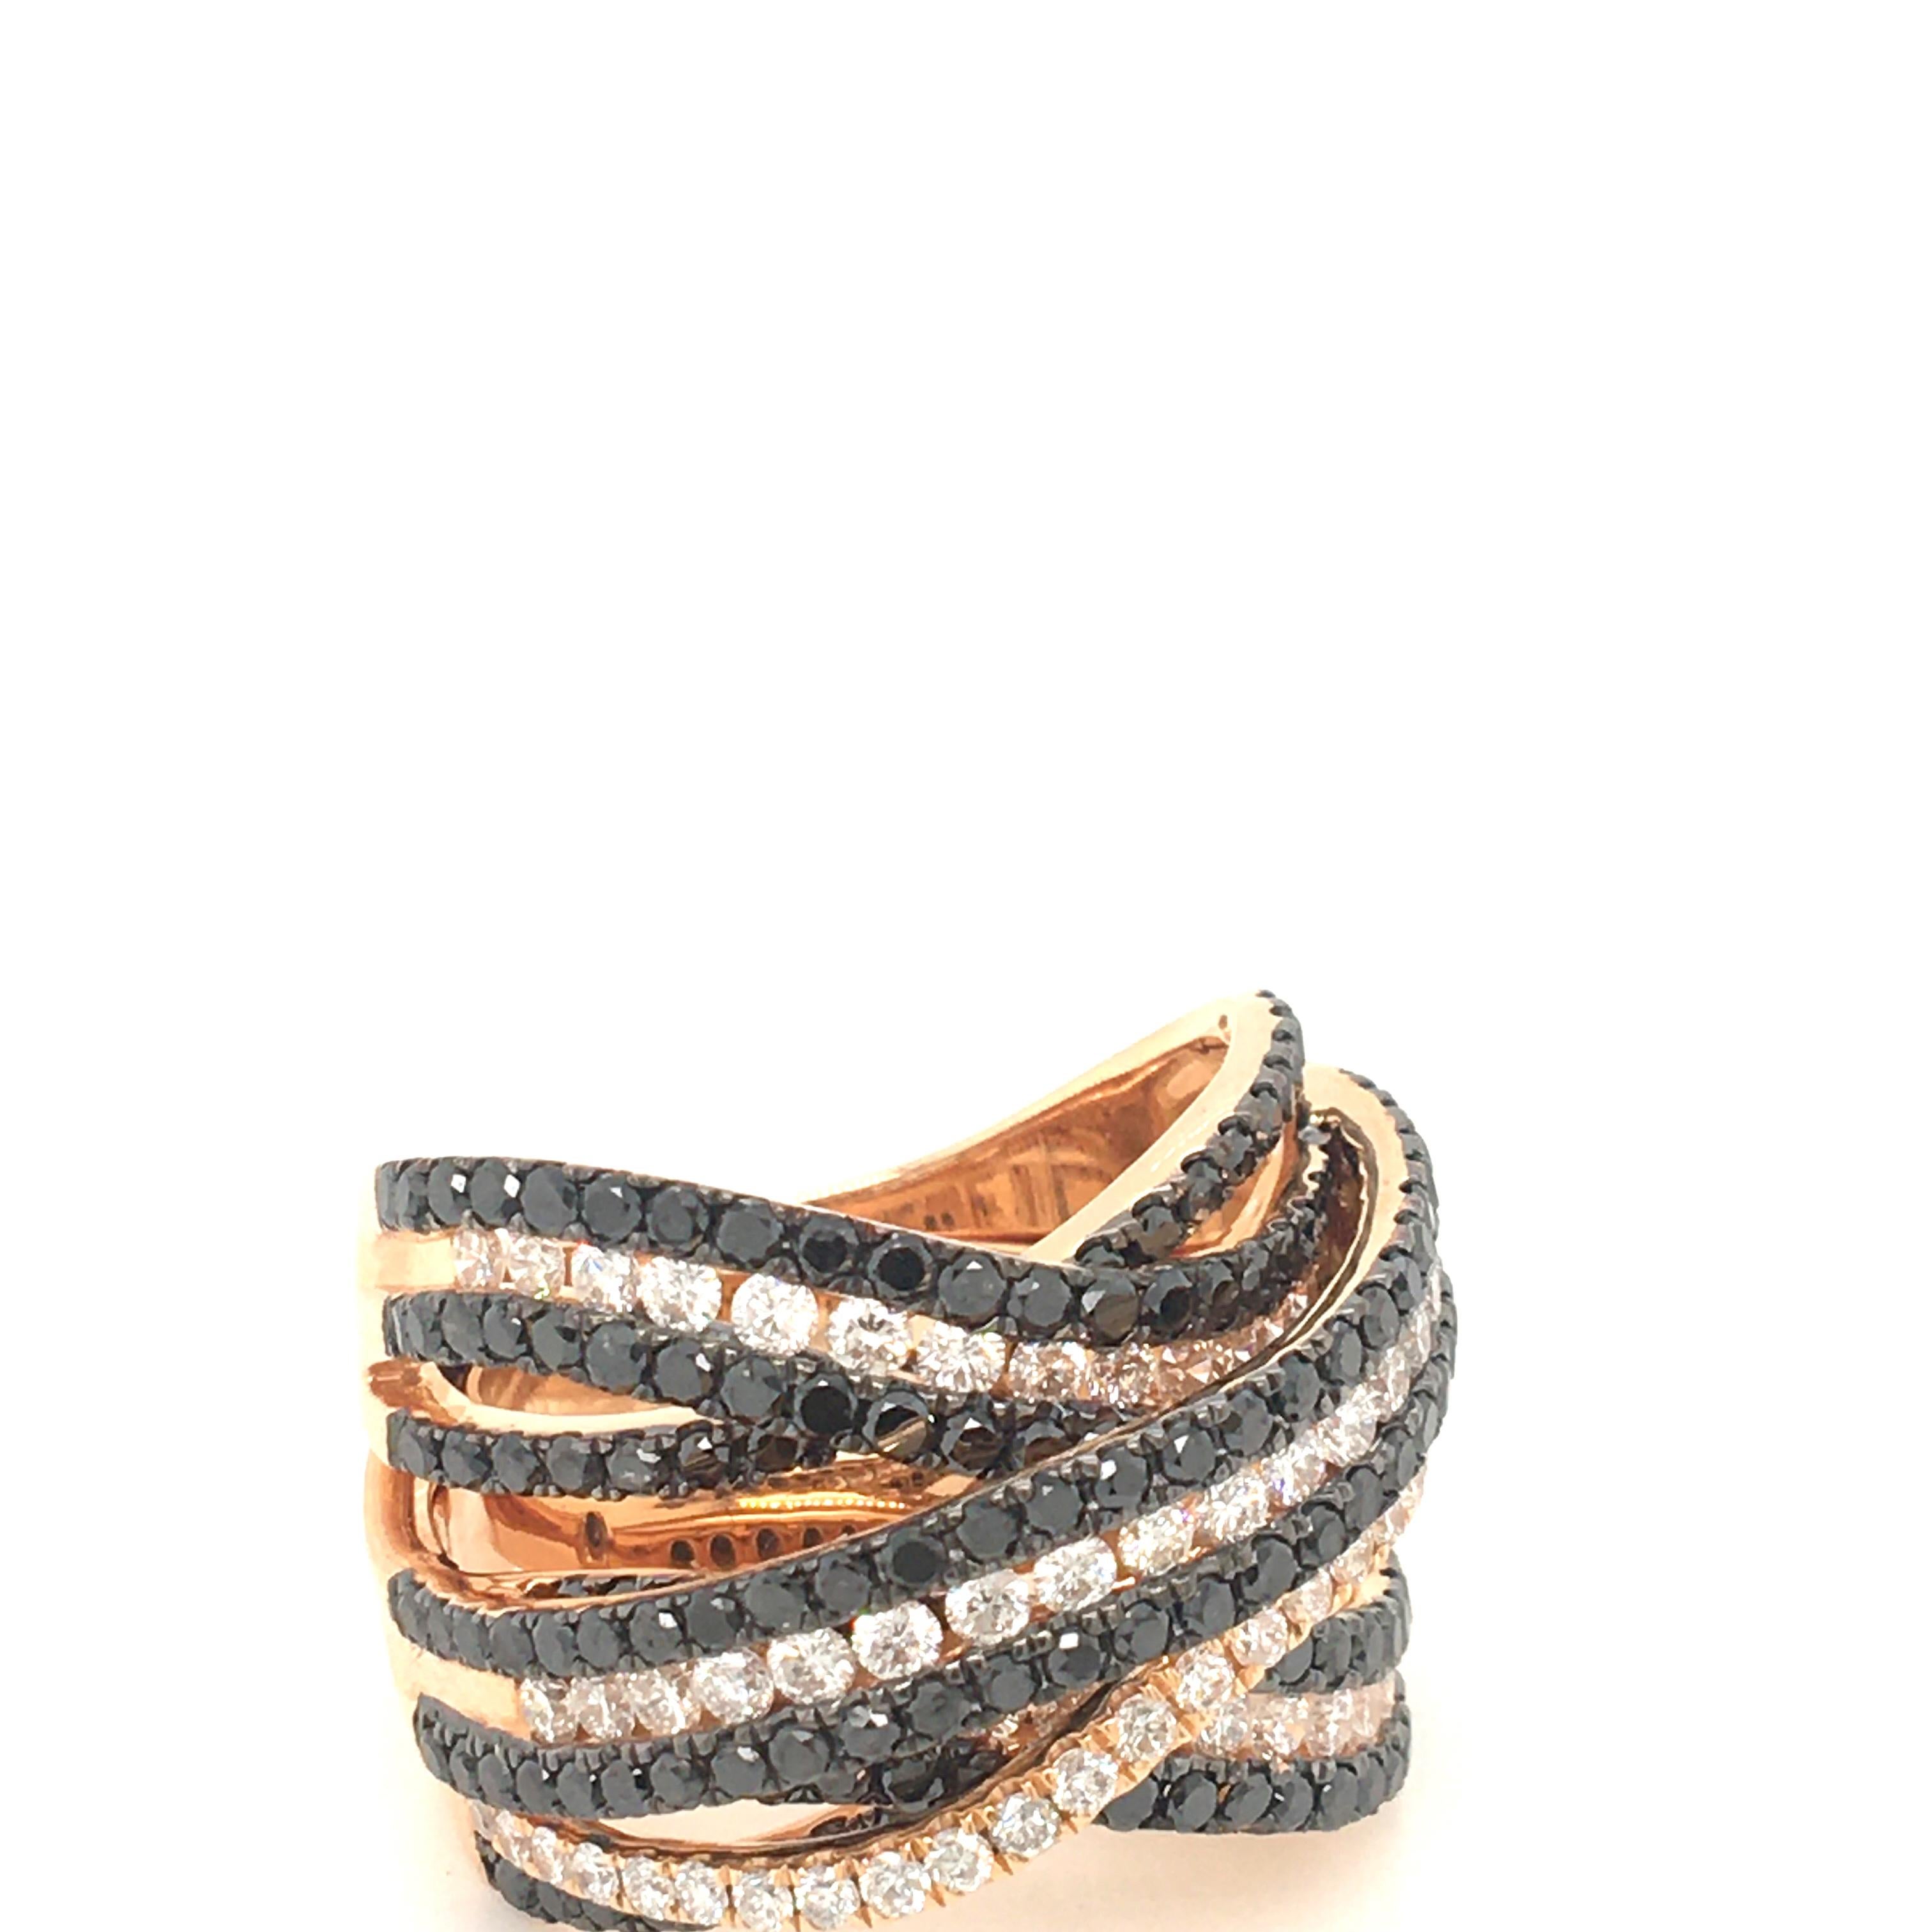 18 KT rose gold  dome ring set with white diamonds carats 1.43 color G 
clarity  VS and black diamonds Carats 2.82, woven design
Made In Italy comes in a Box
finger size 13 Italian size